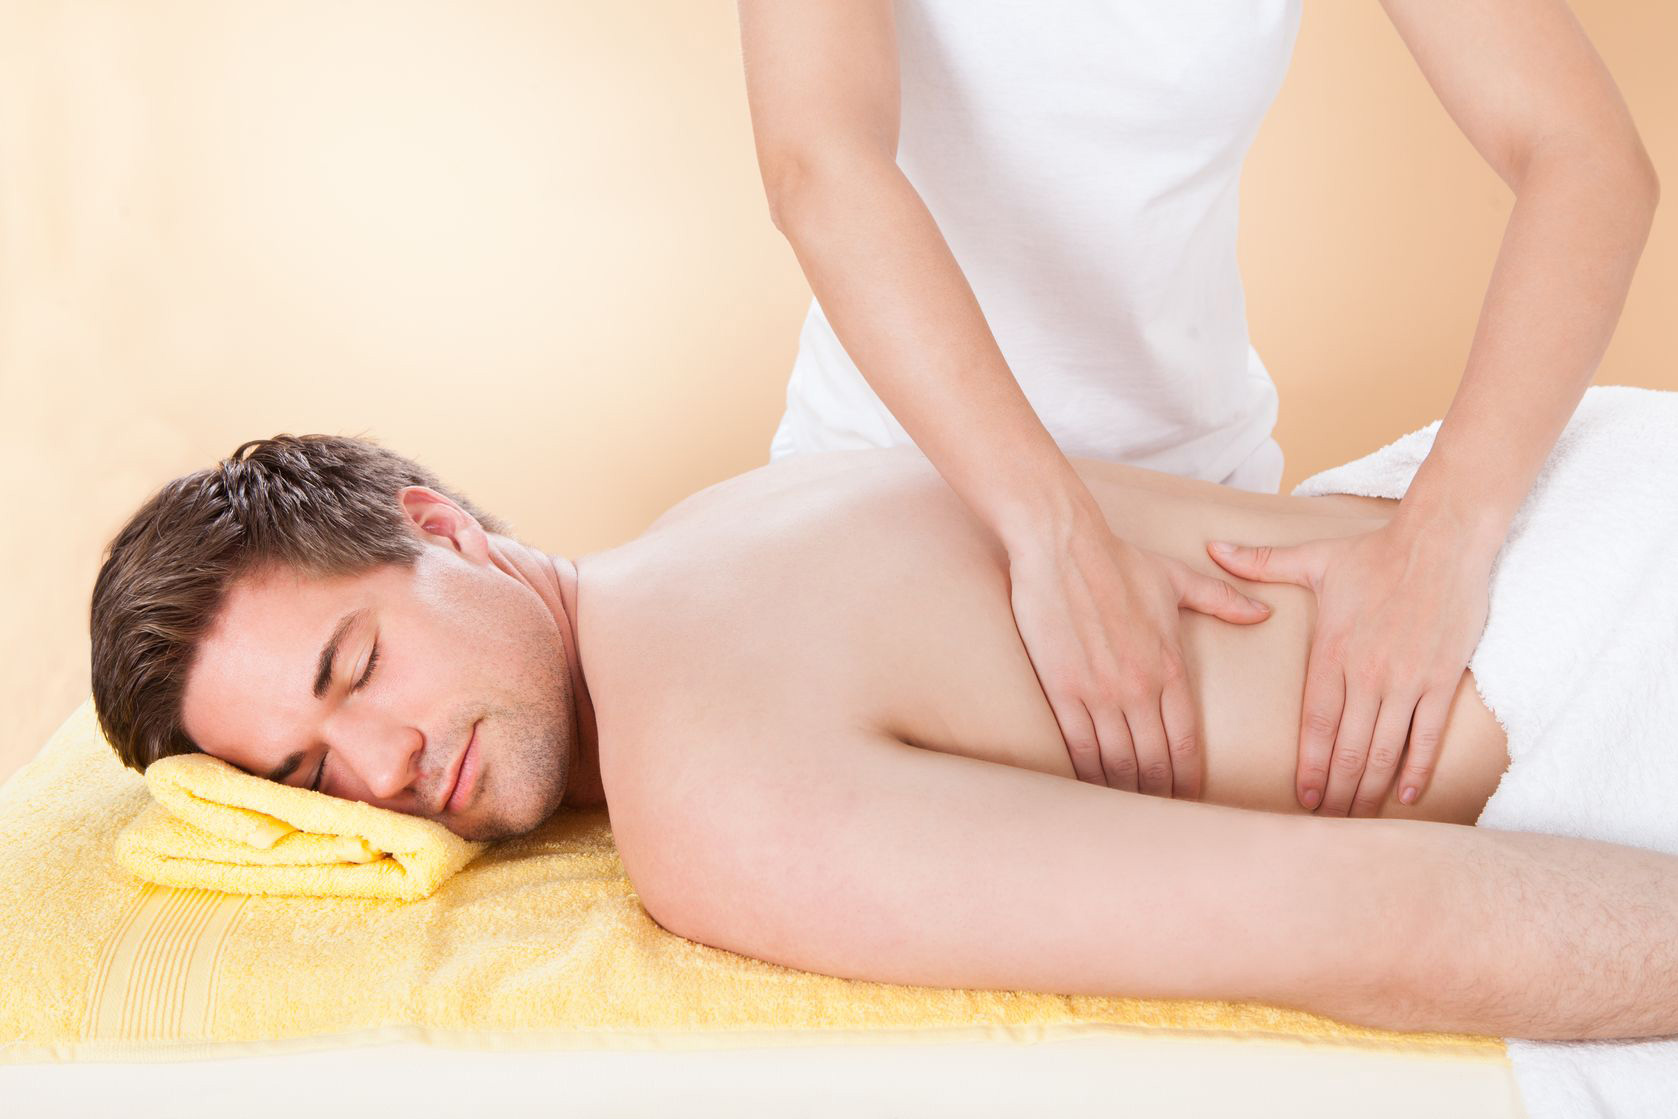 Looking for Swedish massage in Dupont Circle? 